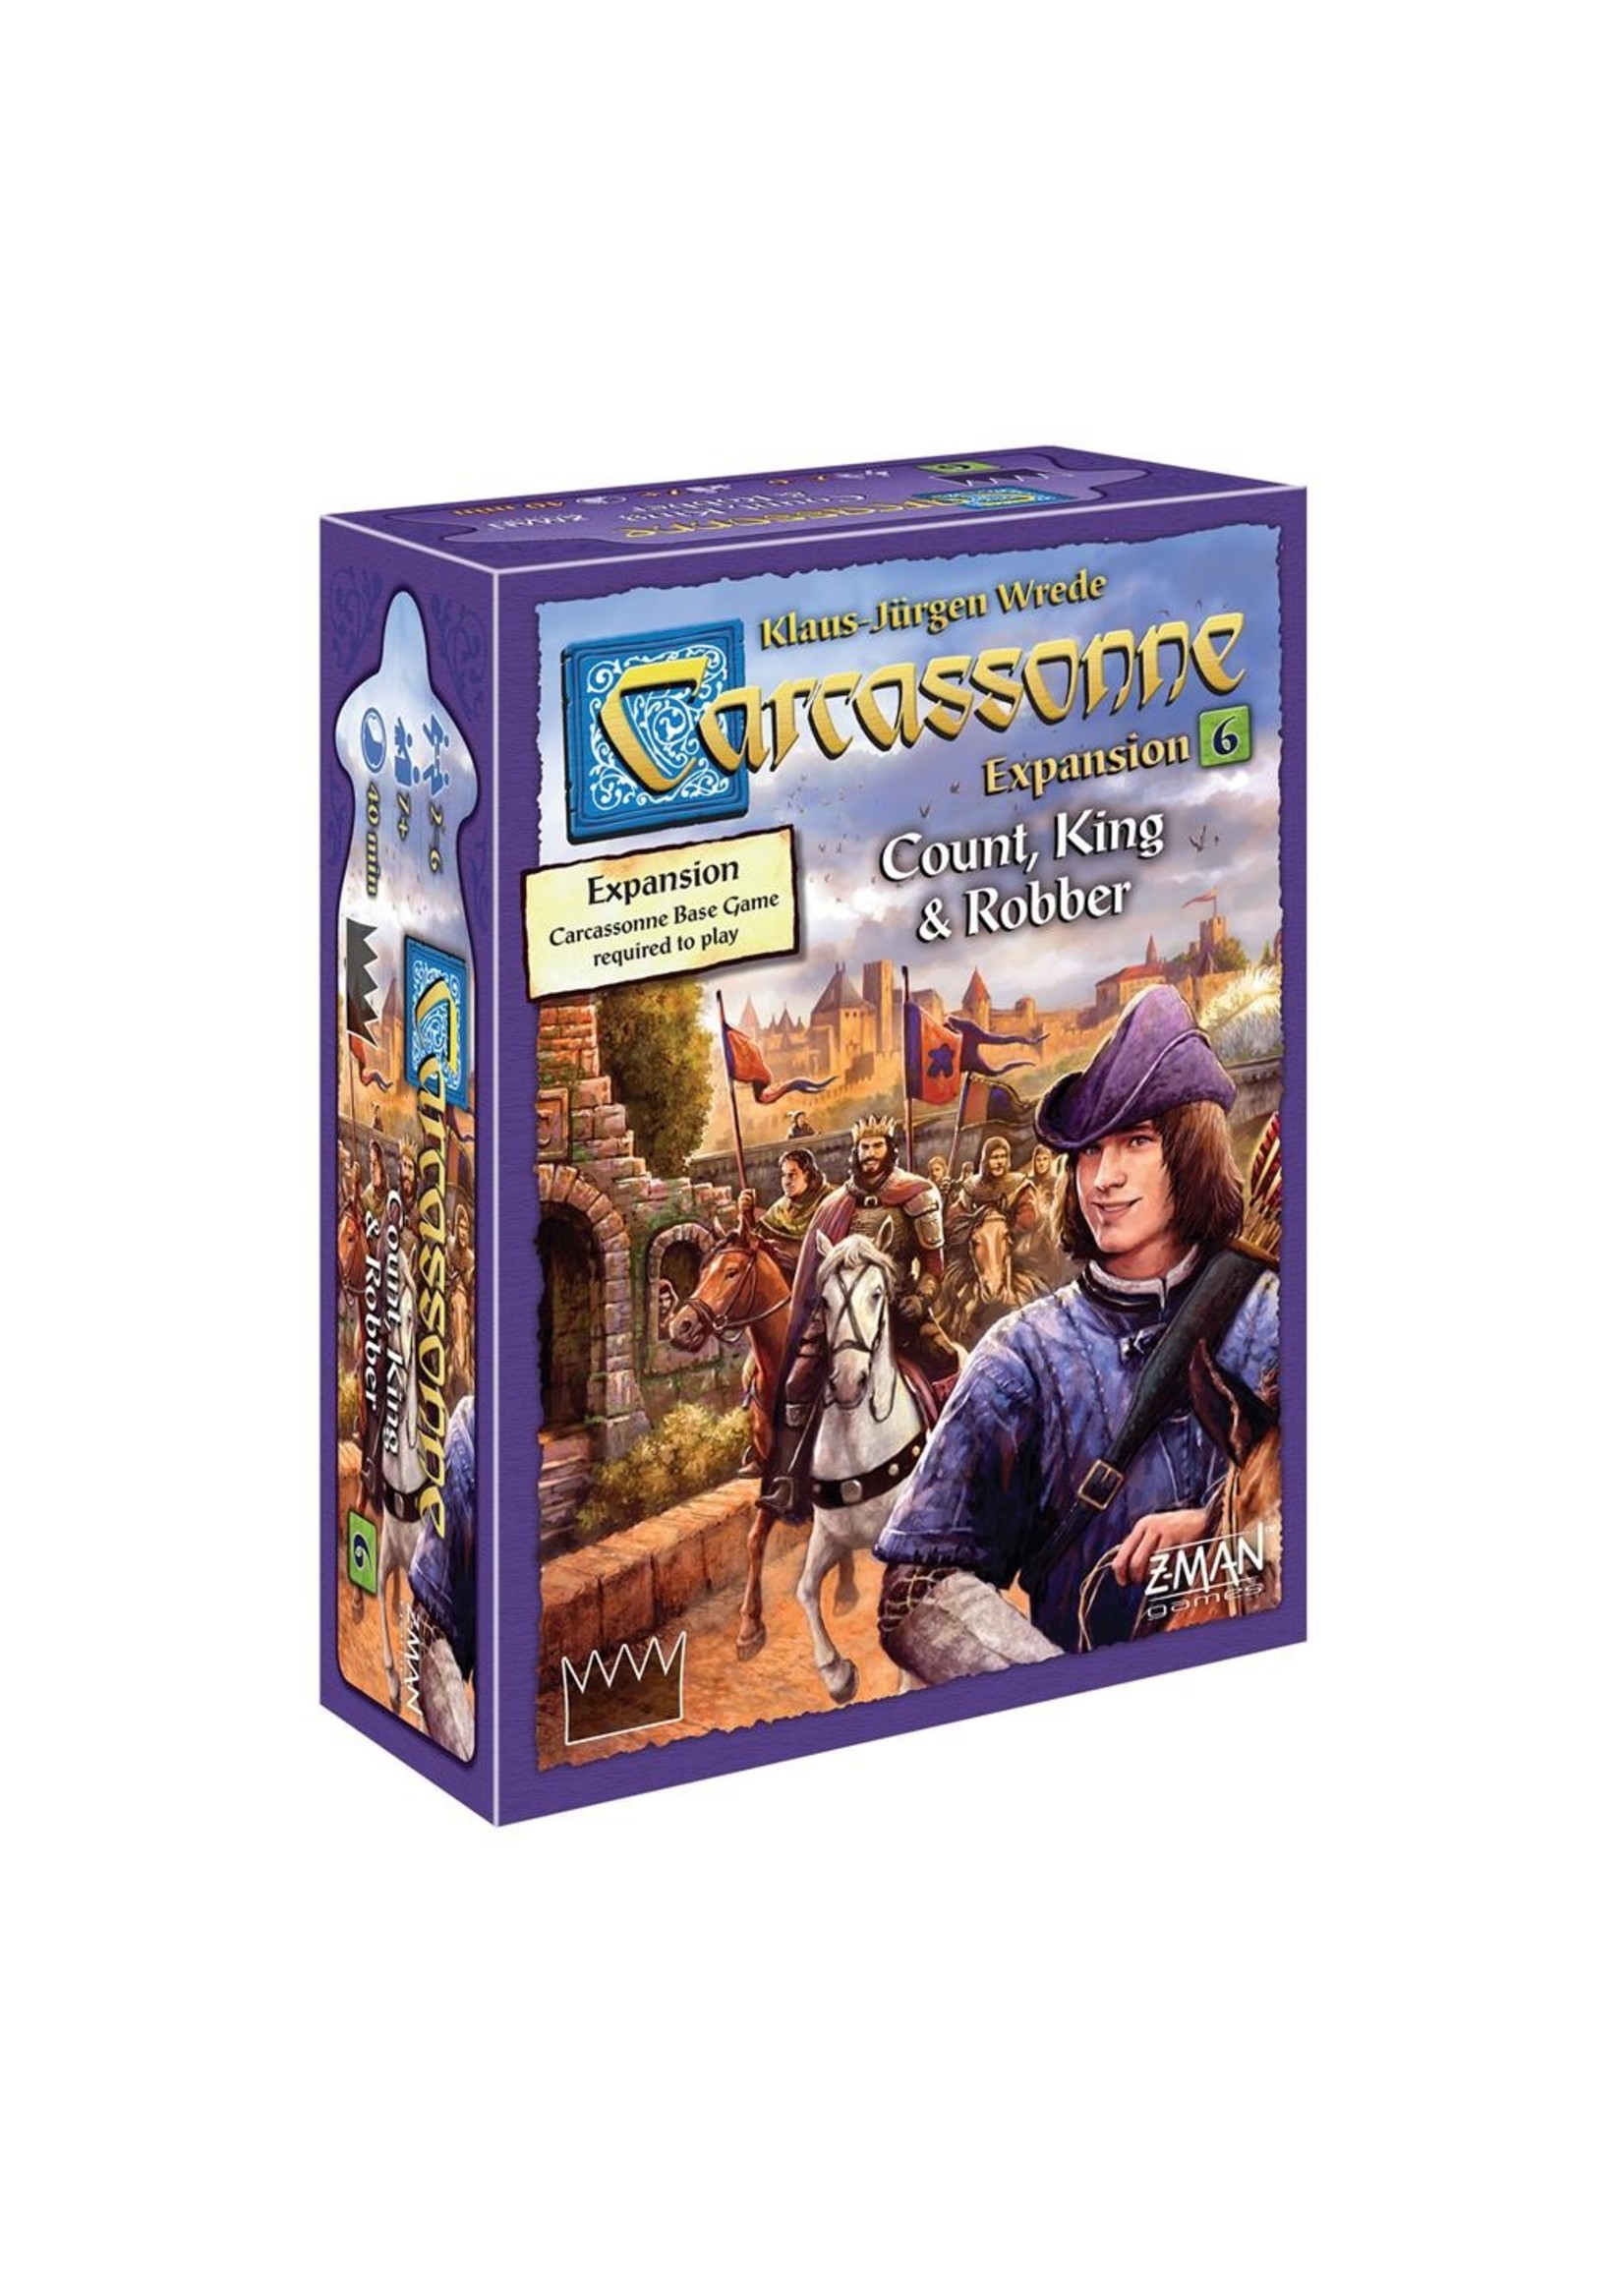 Z-Man Games Carcassonne: Count, King & Robber Expansion